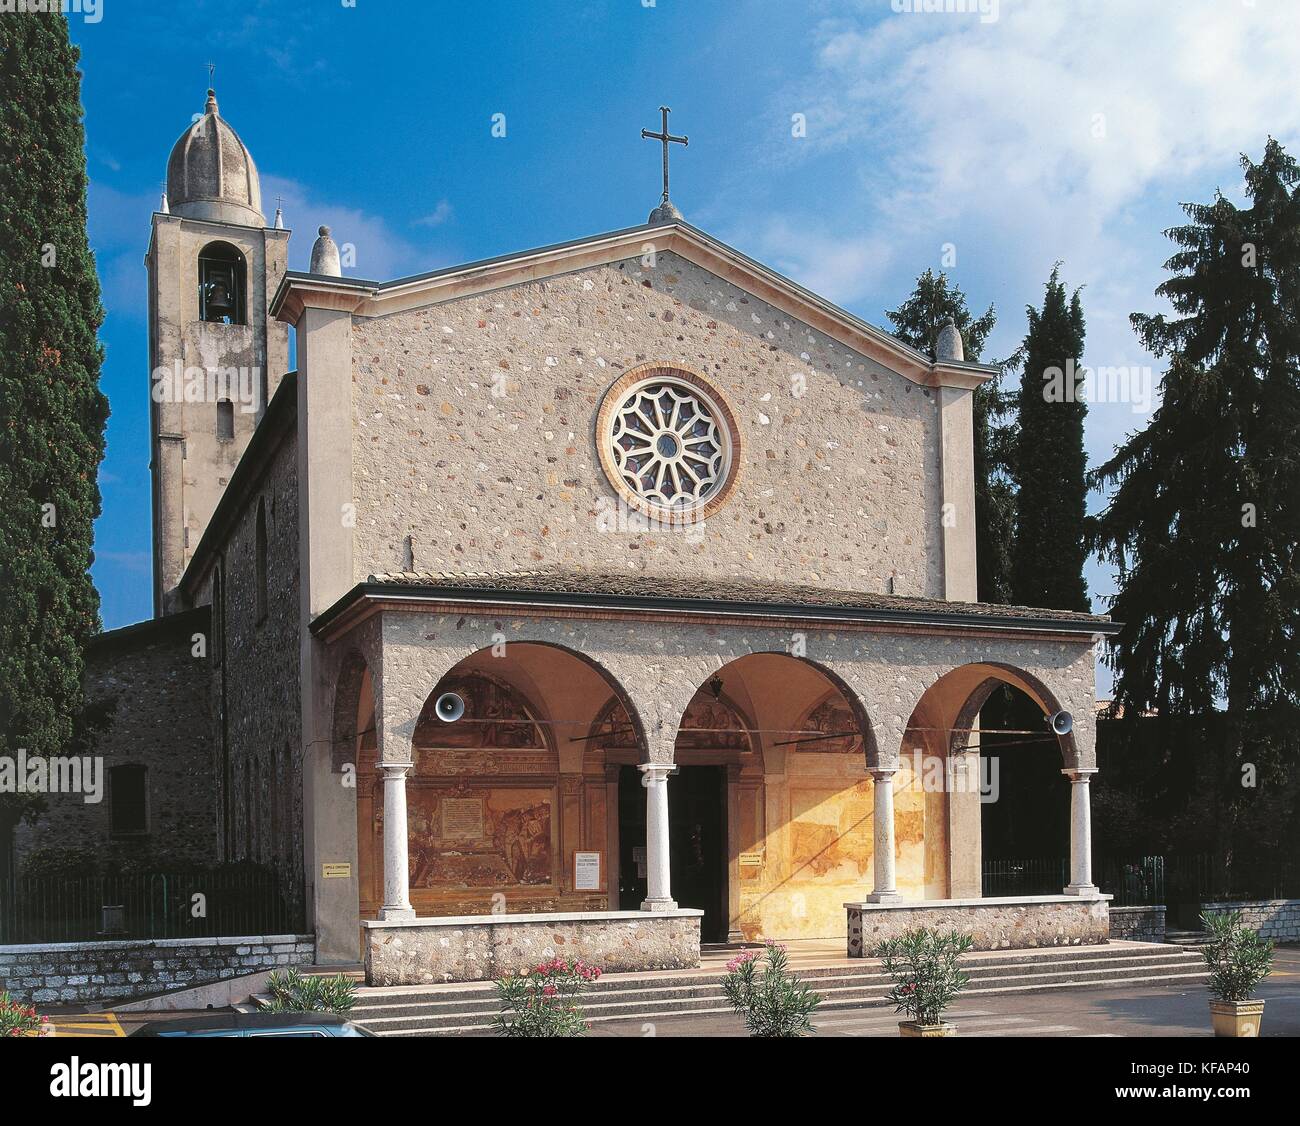 VENETO Peschiera del garda SHRINE OF OUR LADY ASH (sixteenth century and renovated in 1910) Stock Photo